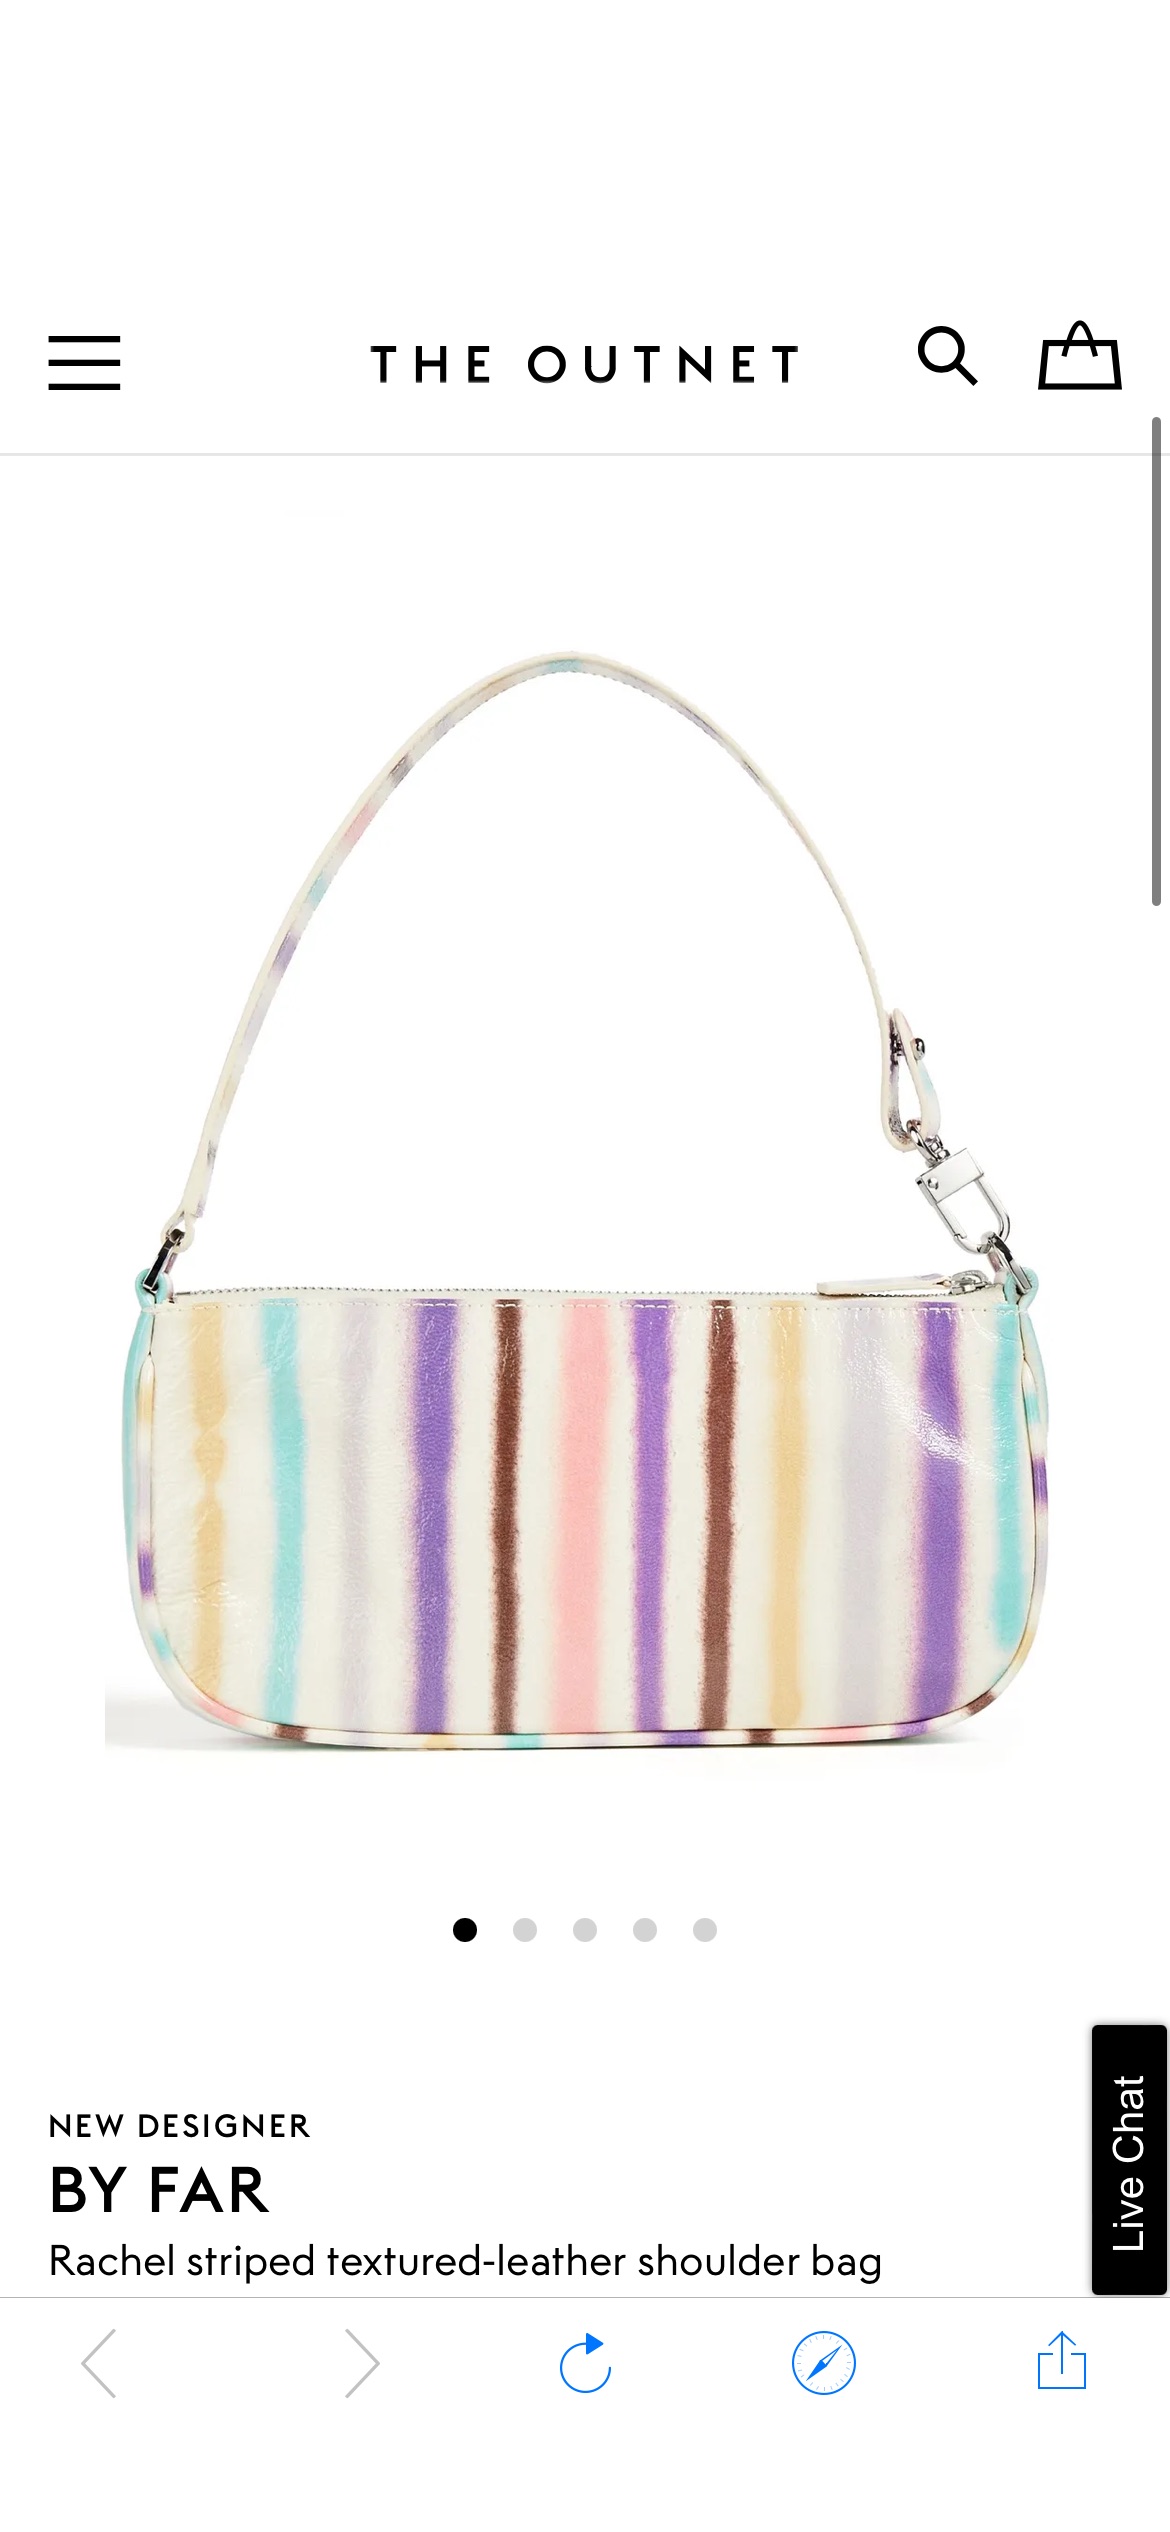 Ivory Rachel striped textured-leather shoulder bag | BY FAR | THE OUTNET